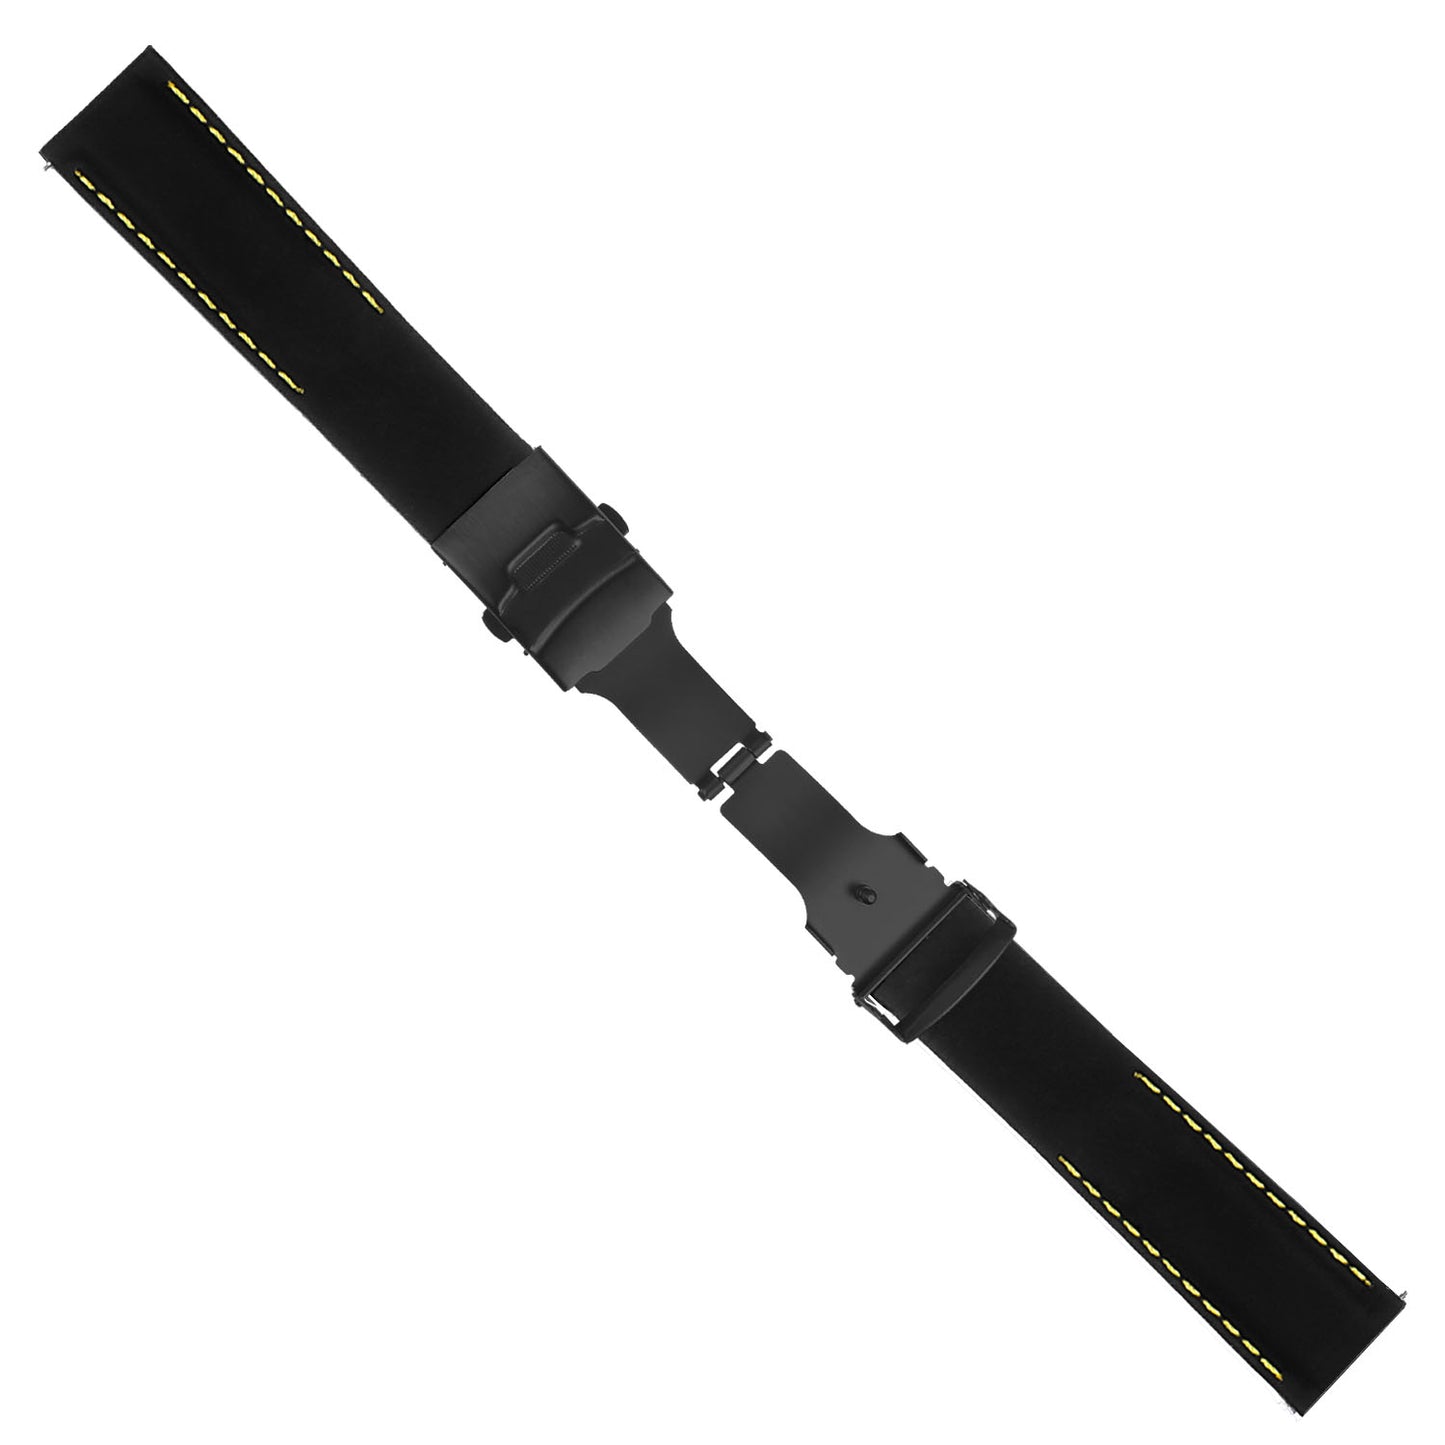 Silicone Rubber Strap with Stitching for Samsung Galaxy Watch Active